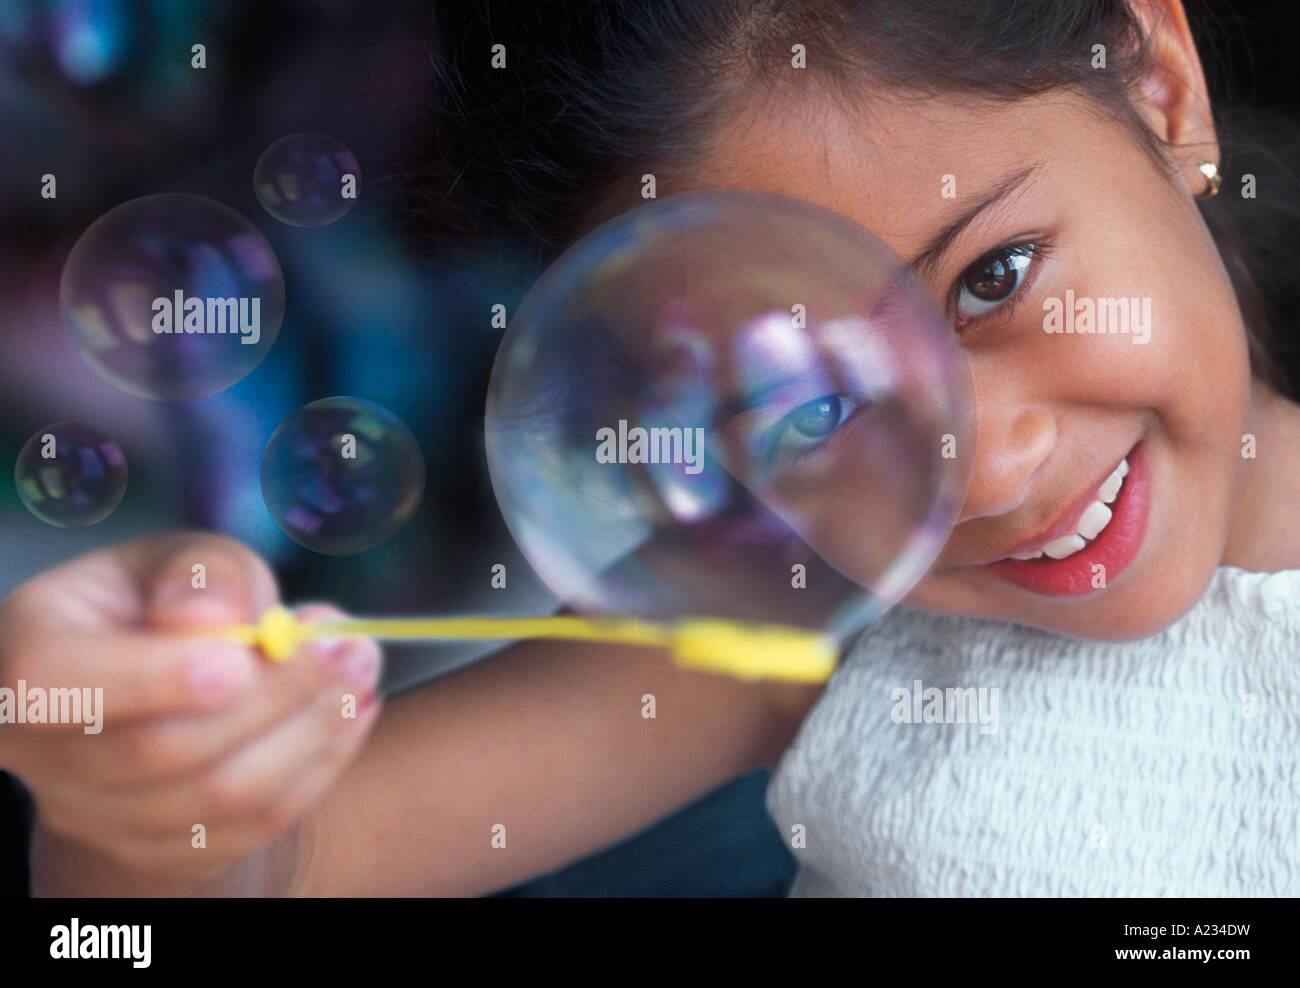 Young girl blowing bubbles. Pretty child looking at camera playing games and smiling Stock Photo